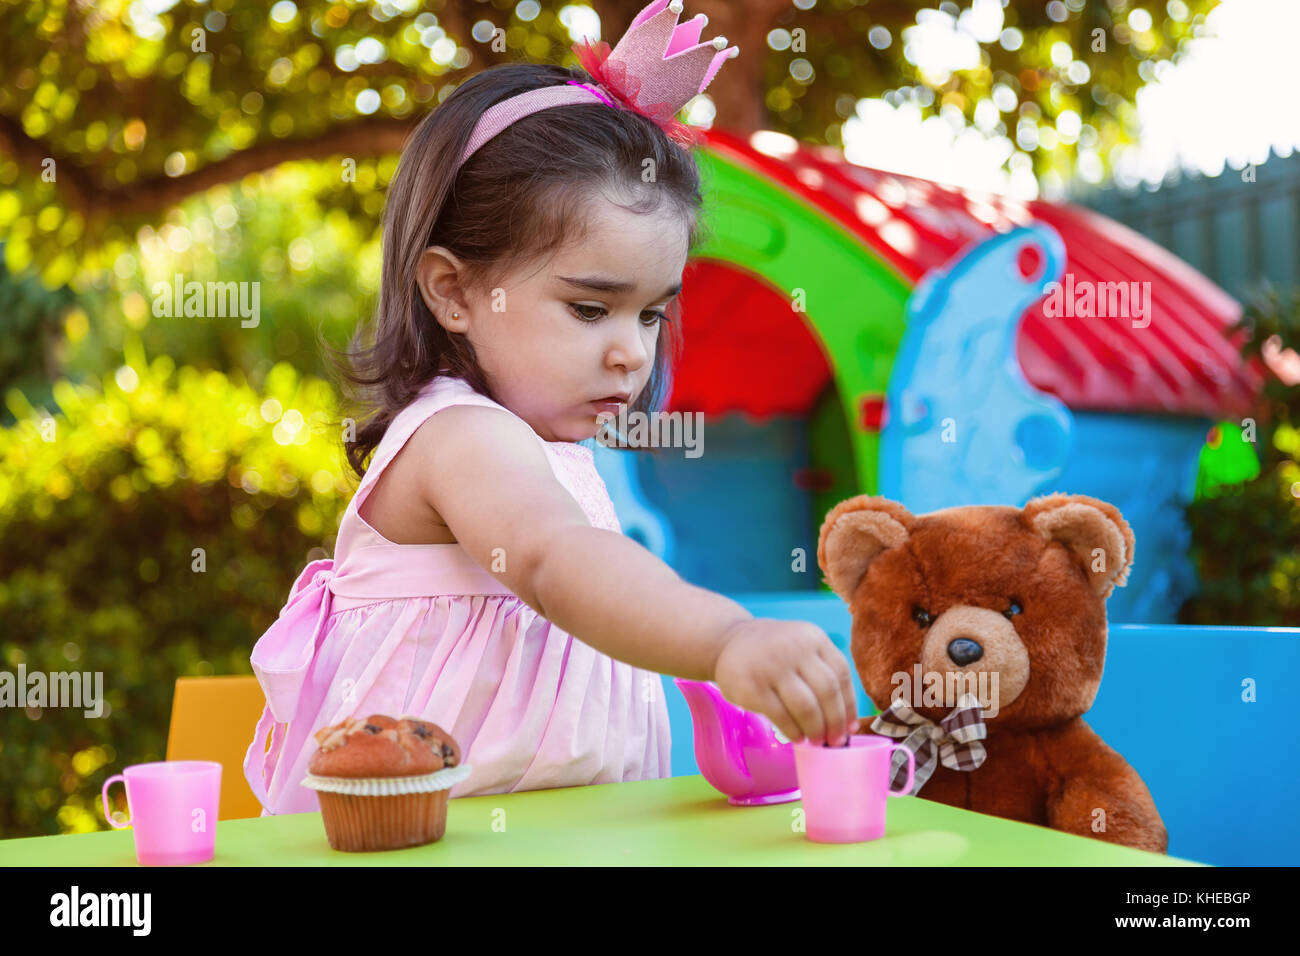 Baby toddler girl playing in outdoor tea party serving her best friend Teddy Bear with candy gummy. Pink dress and queen or princess crown. Stock Photo